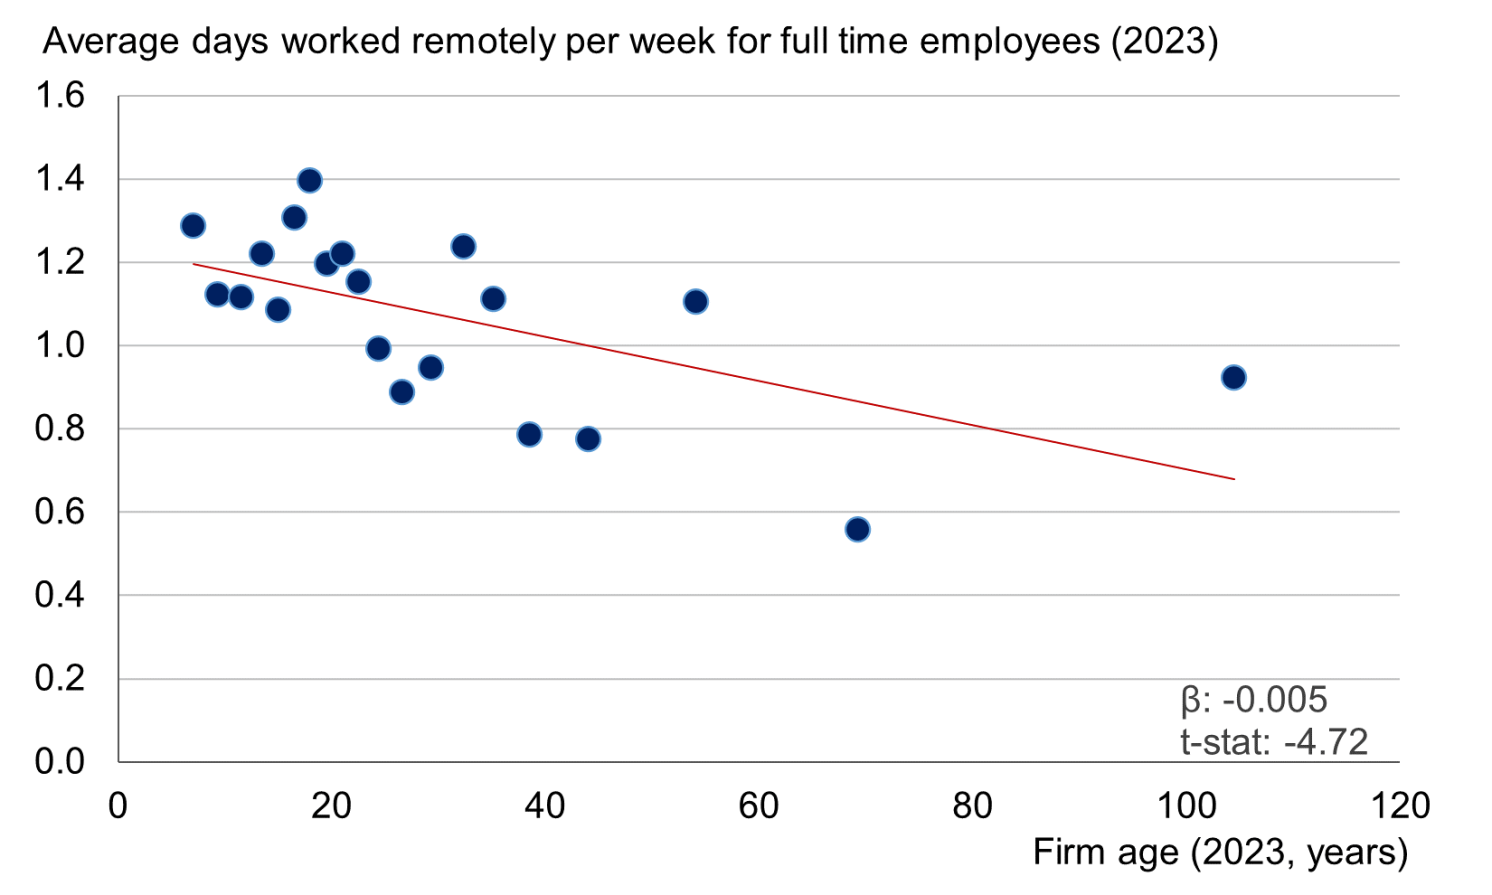 Figure 2 Firm age and the average number of working days done remotely per week, 2023